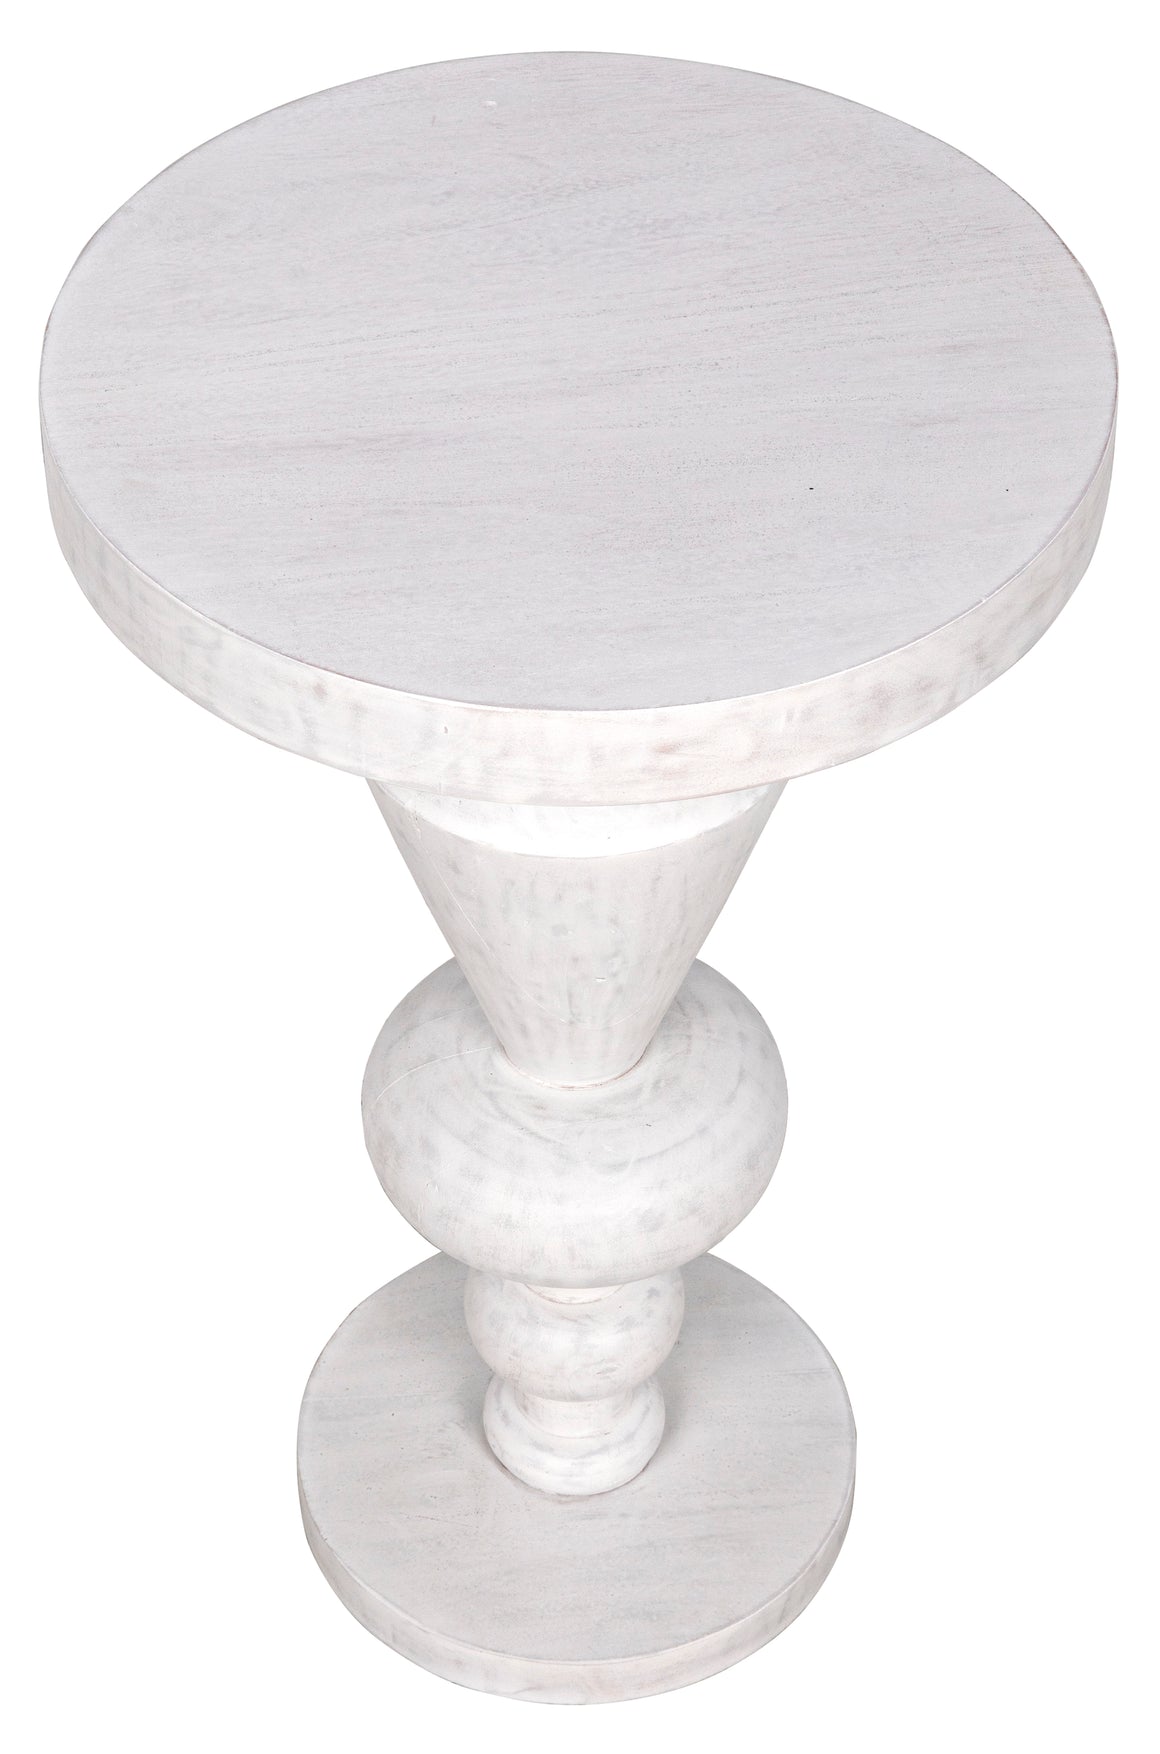 Fenring Side Table - White Wash